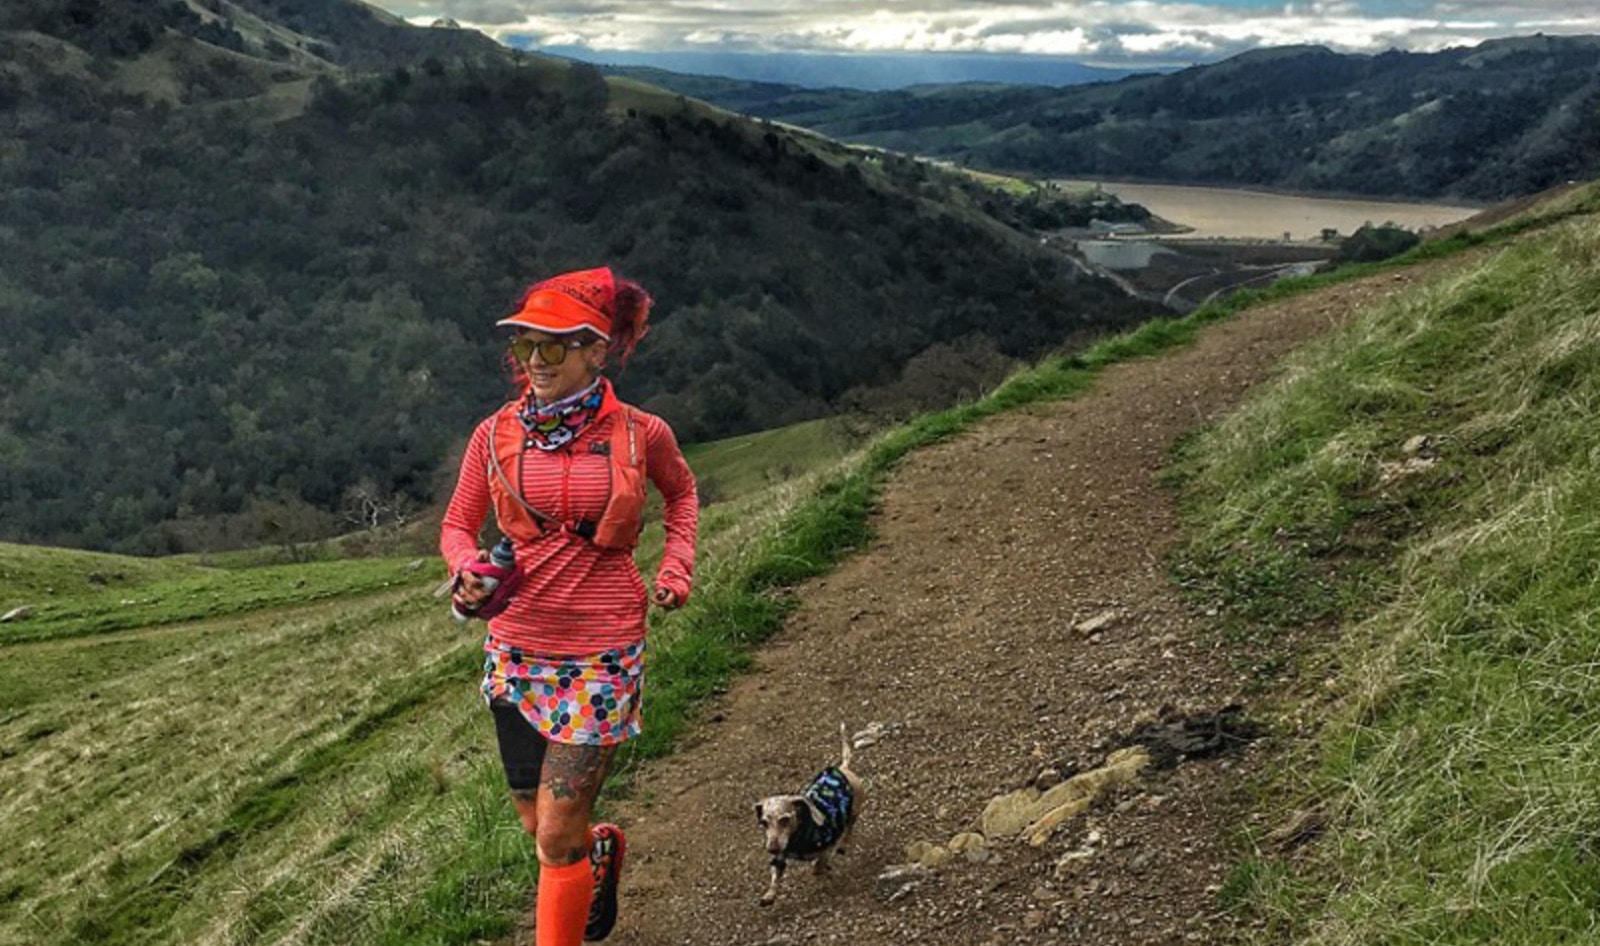 53-Year-Old Vegan Runner Sets Fastest Known Time for 310-Mile Race